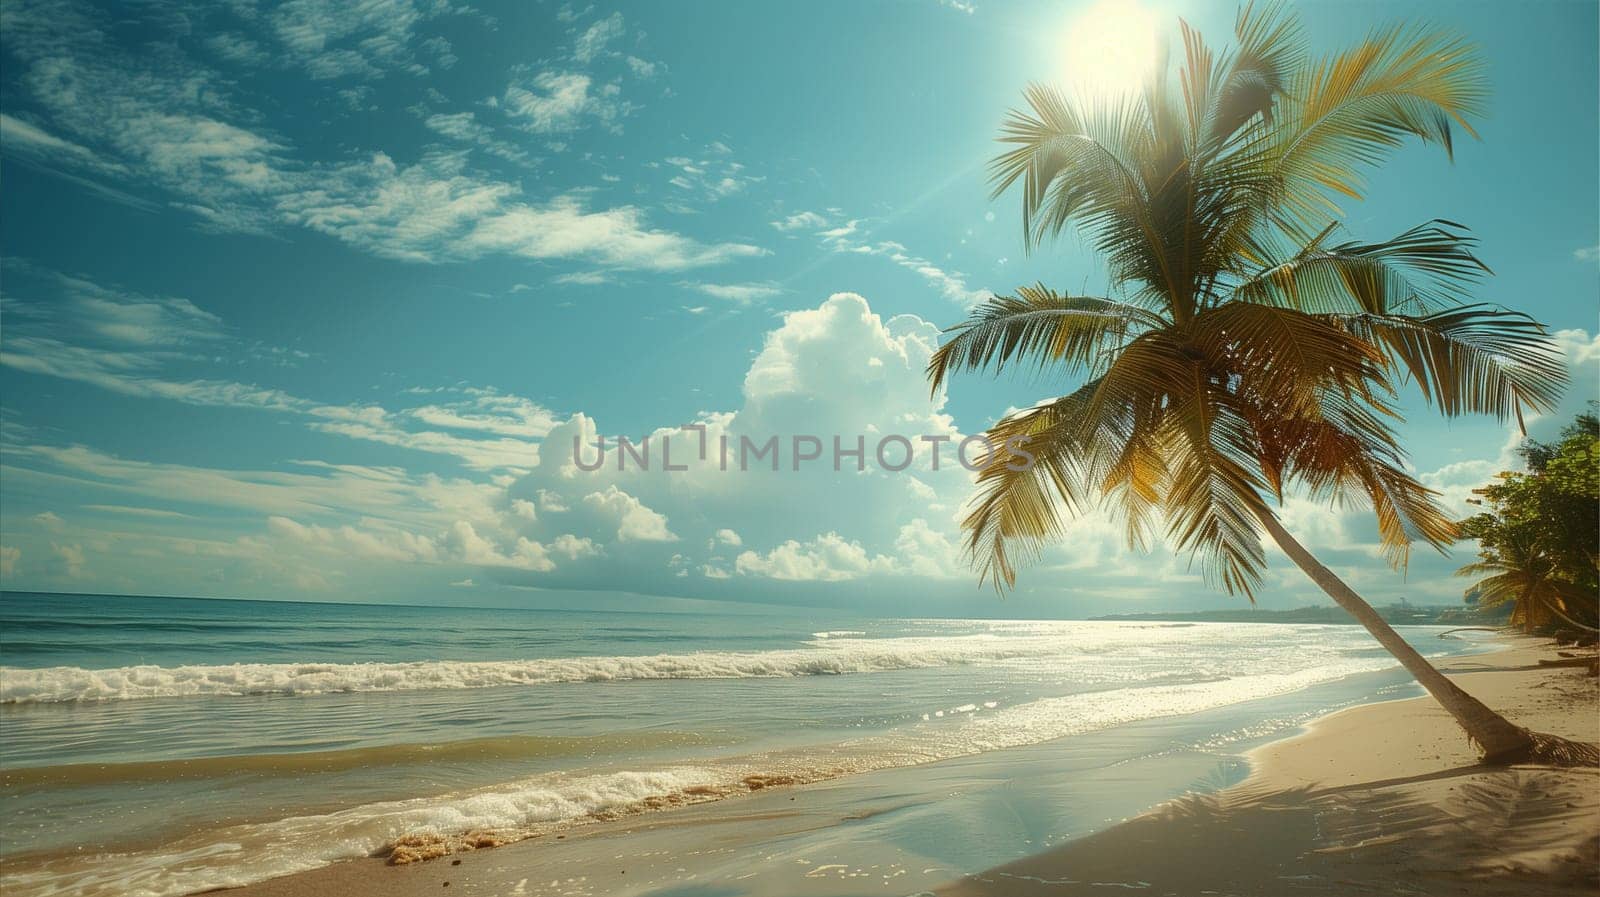 A palm tree standing upright on a sandy beach with clear blue skies in the background.